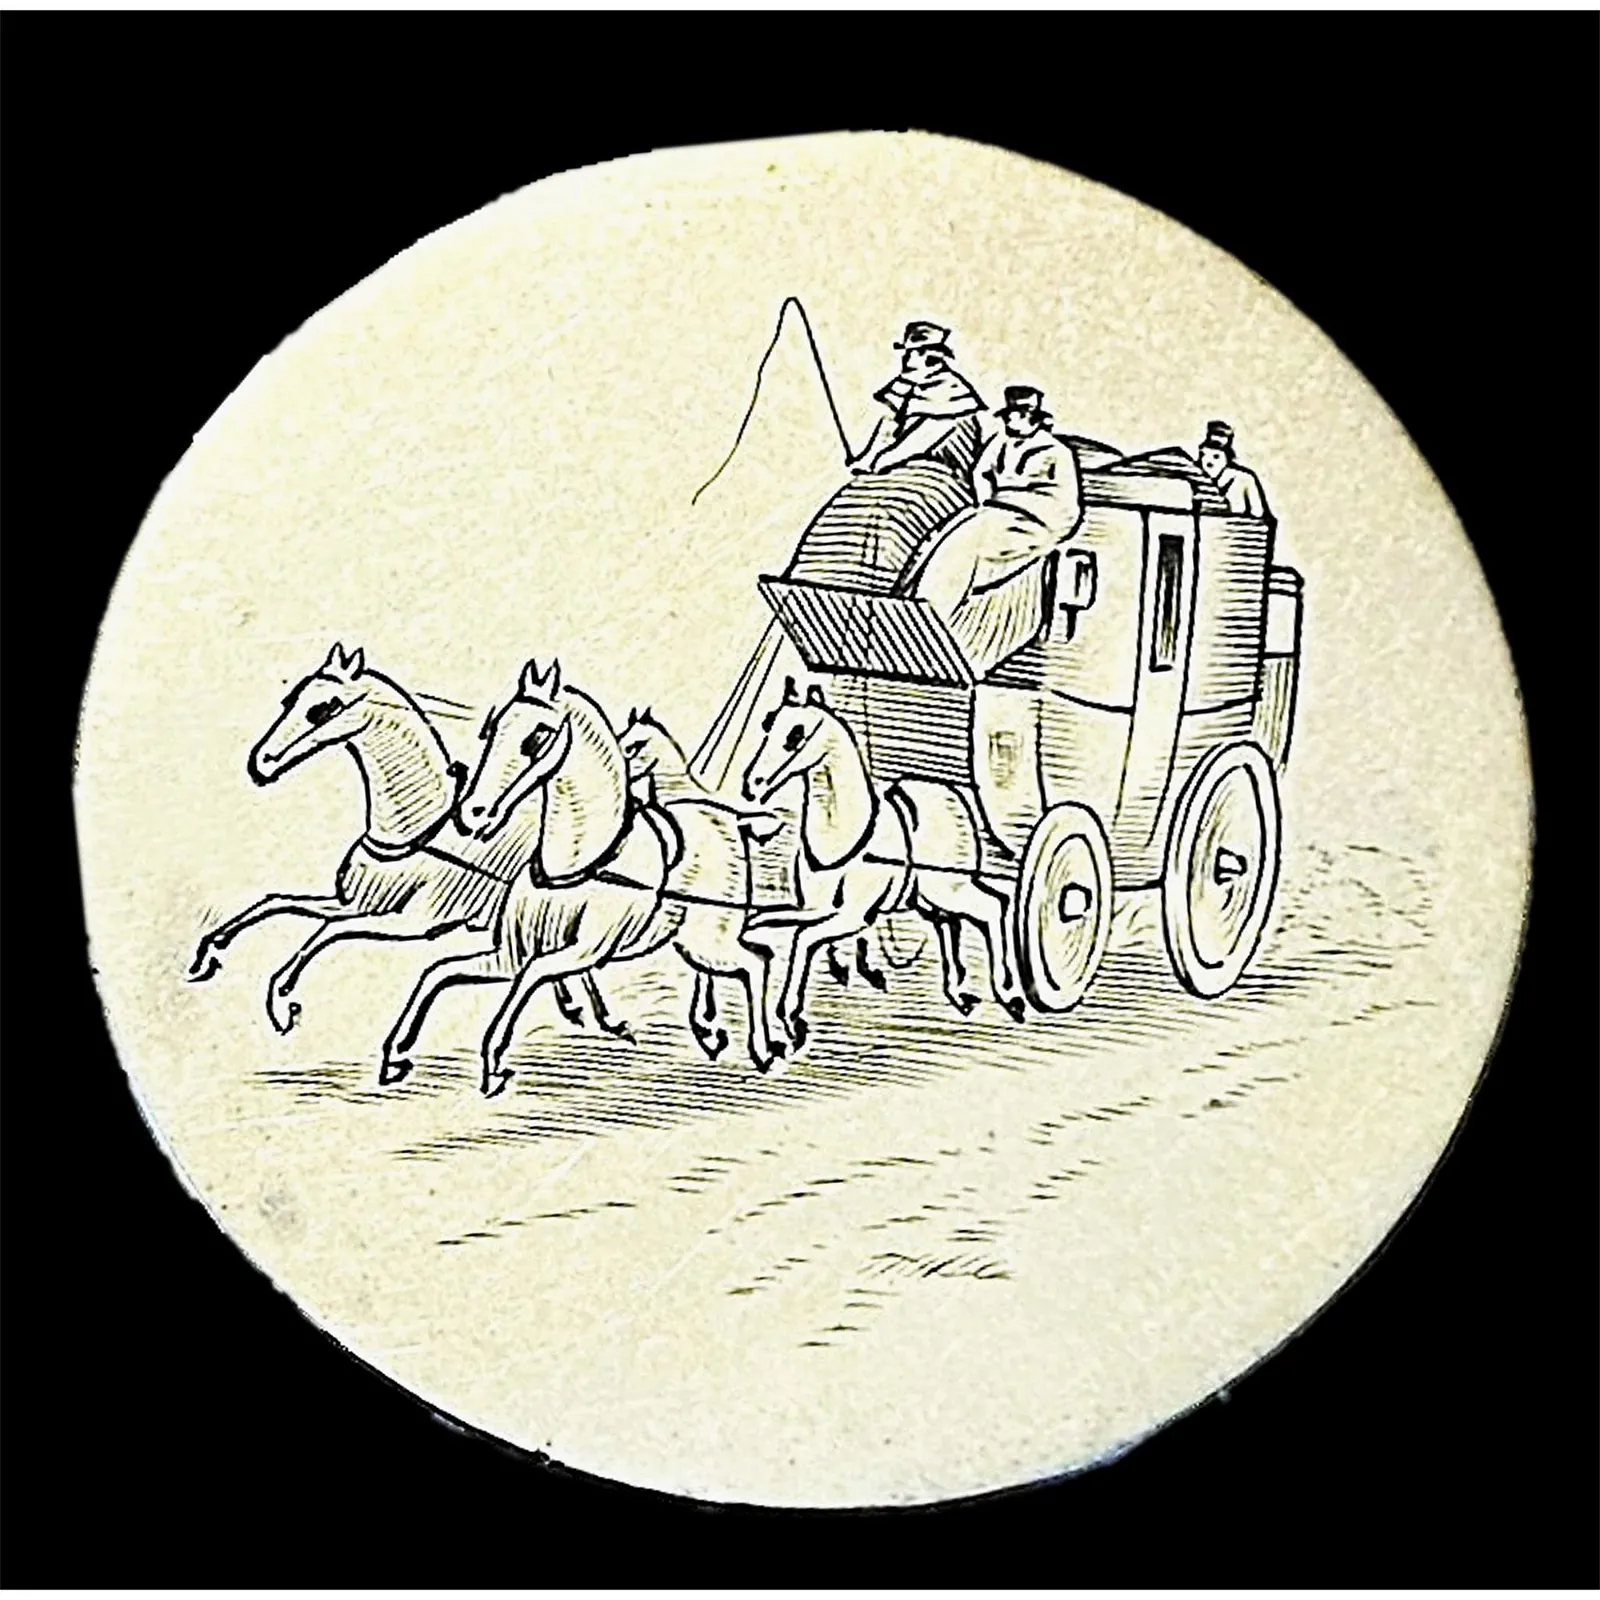 Lot #493, an engraved Tombac pictorial button, was estimated at $1,500 to $2,500 and sold for $6,250. Image courtesy of Lion and Unicorn. 
